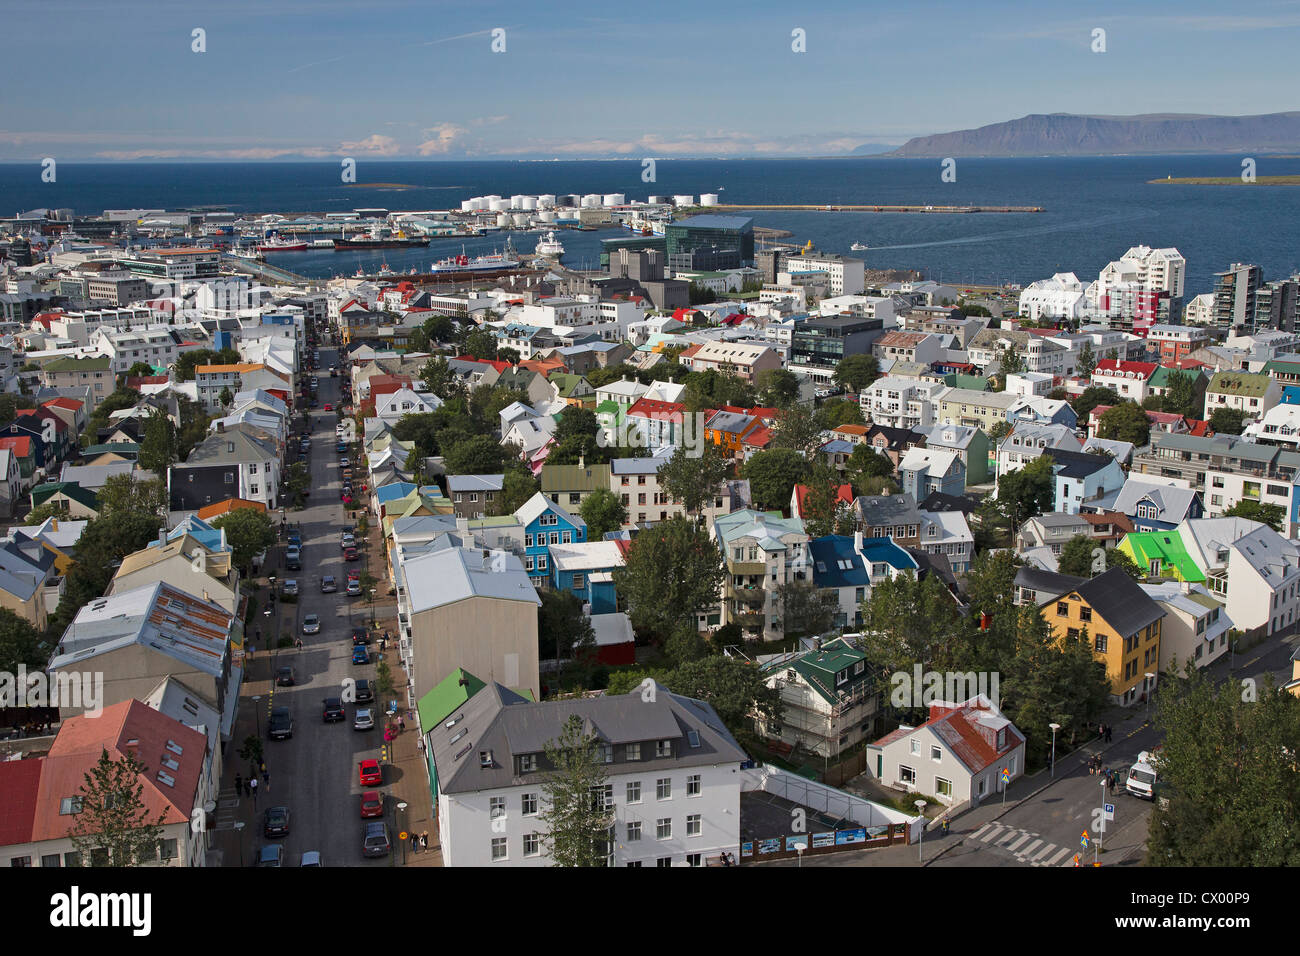 Aerial view of Reykjavik and harbour from the Hallgrimskirkja church tower. Stock Photo